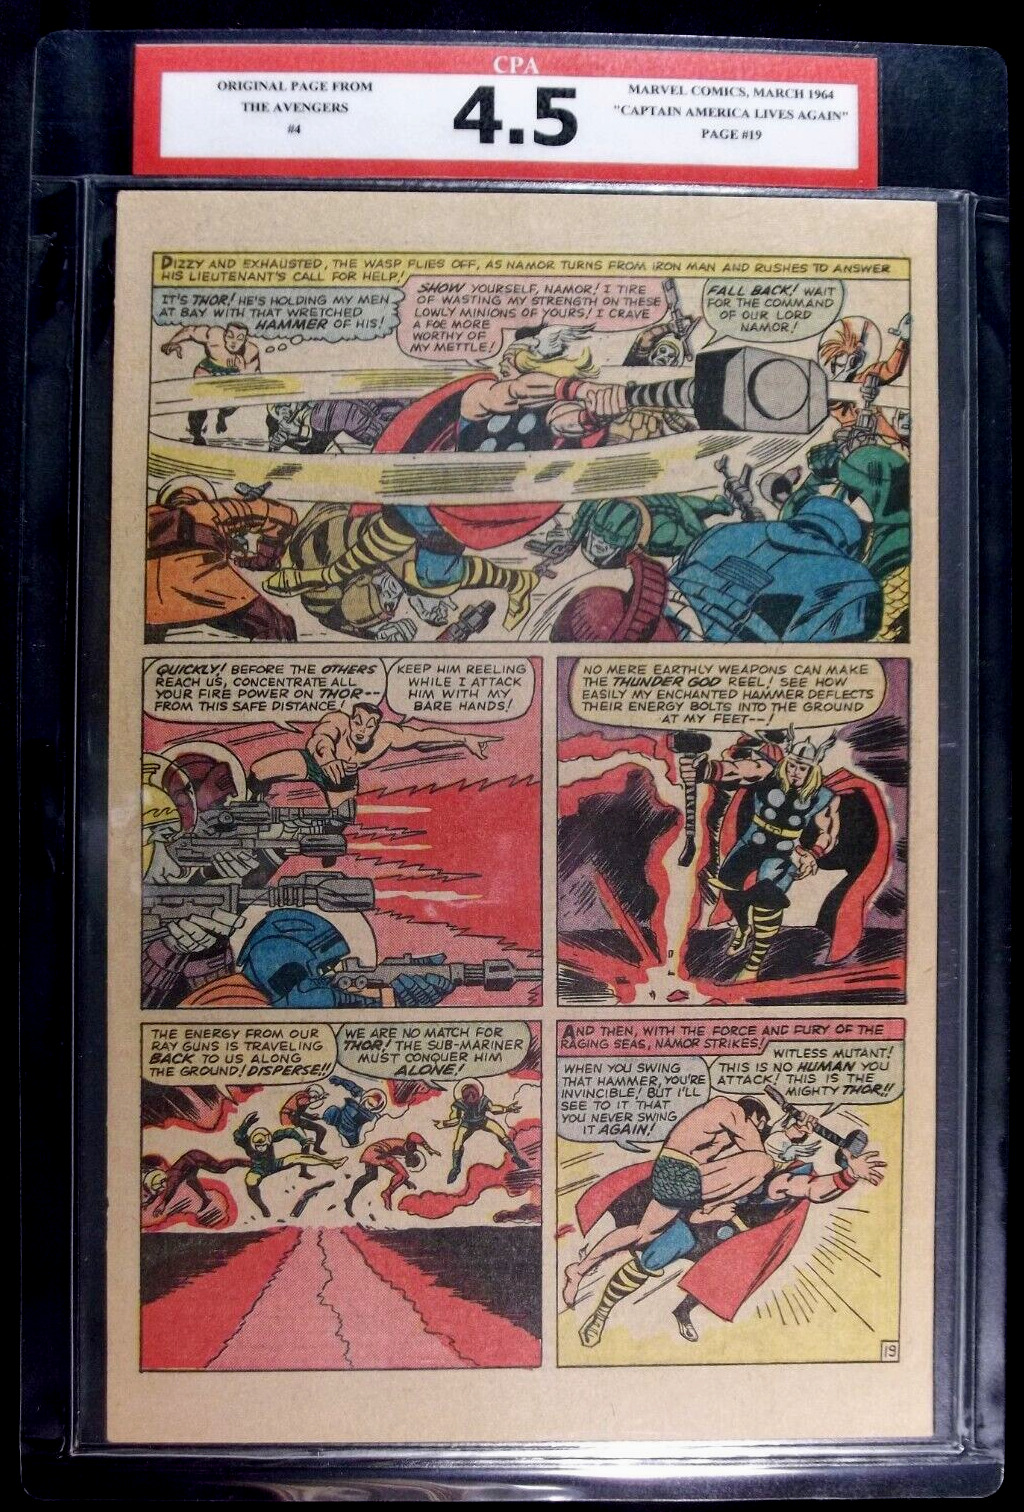 The Avengers #4 CPA 4.5 SINGLE PAGE #19 1st Silver Age App of Captain America